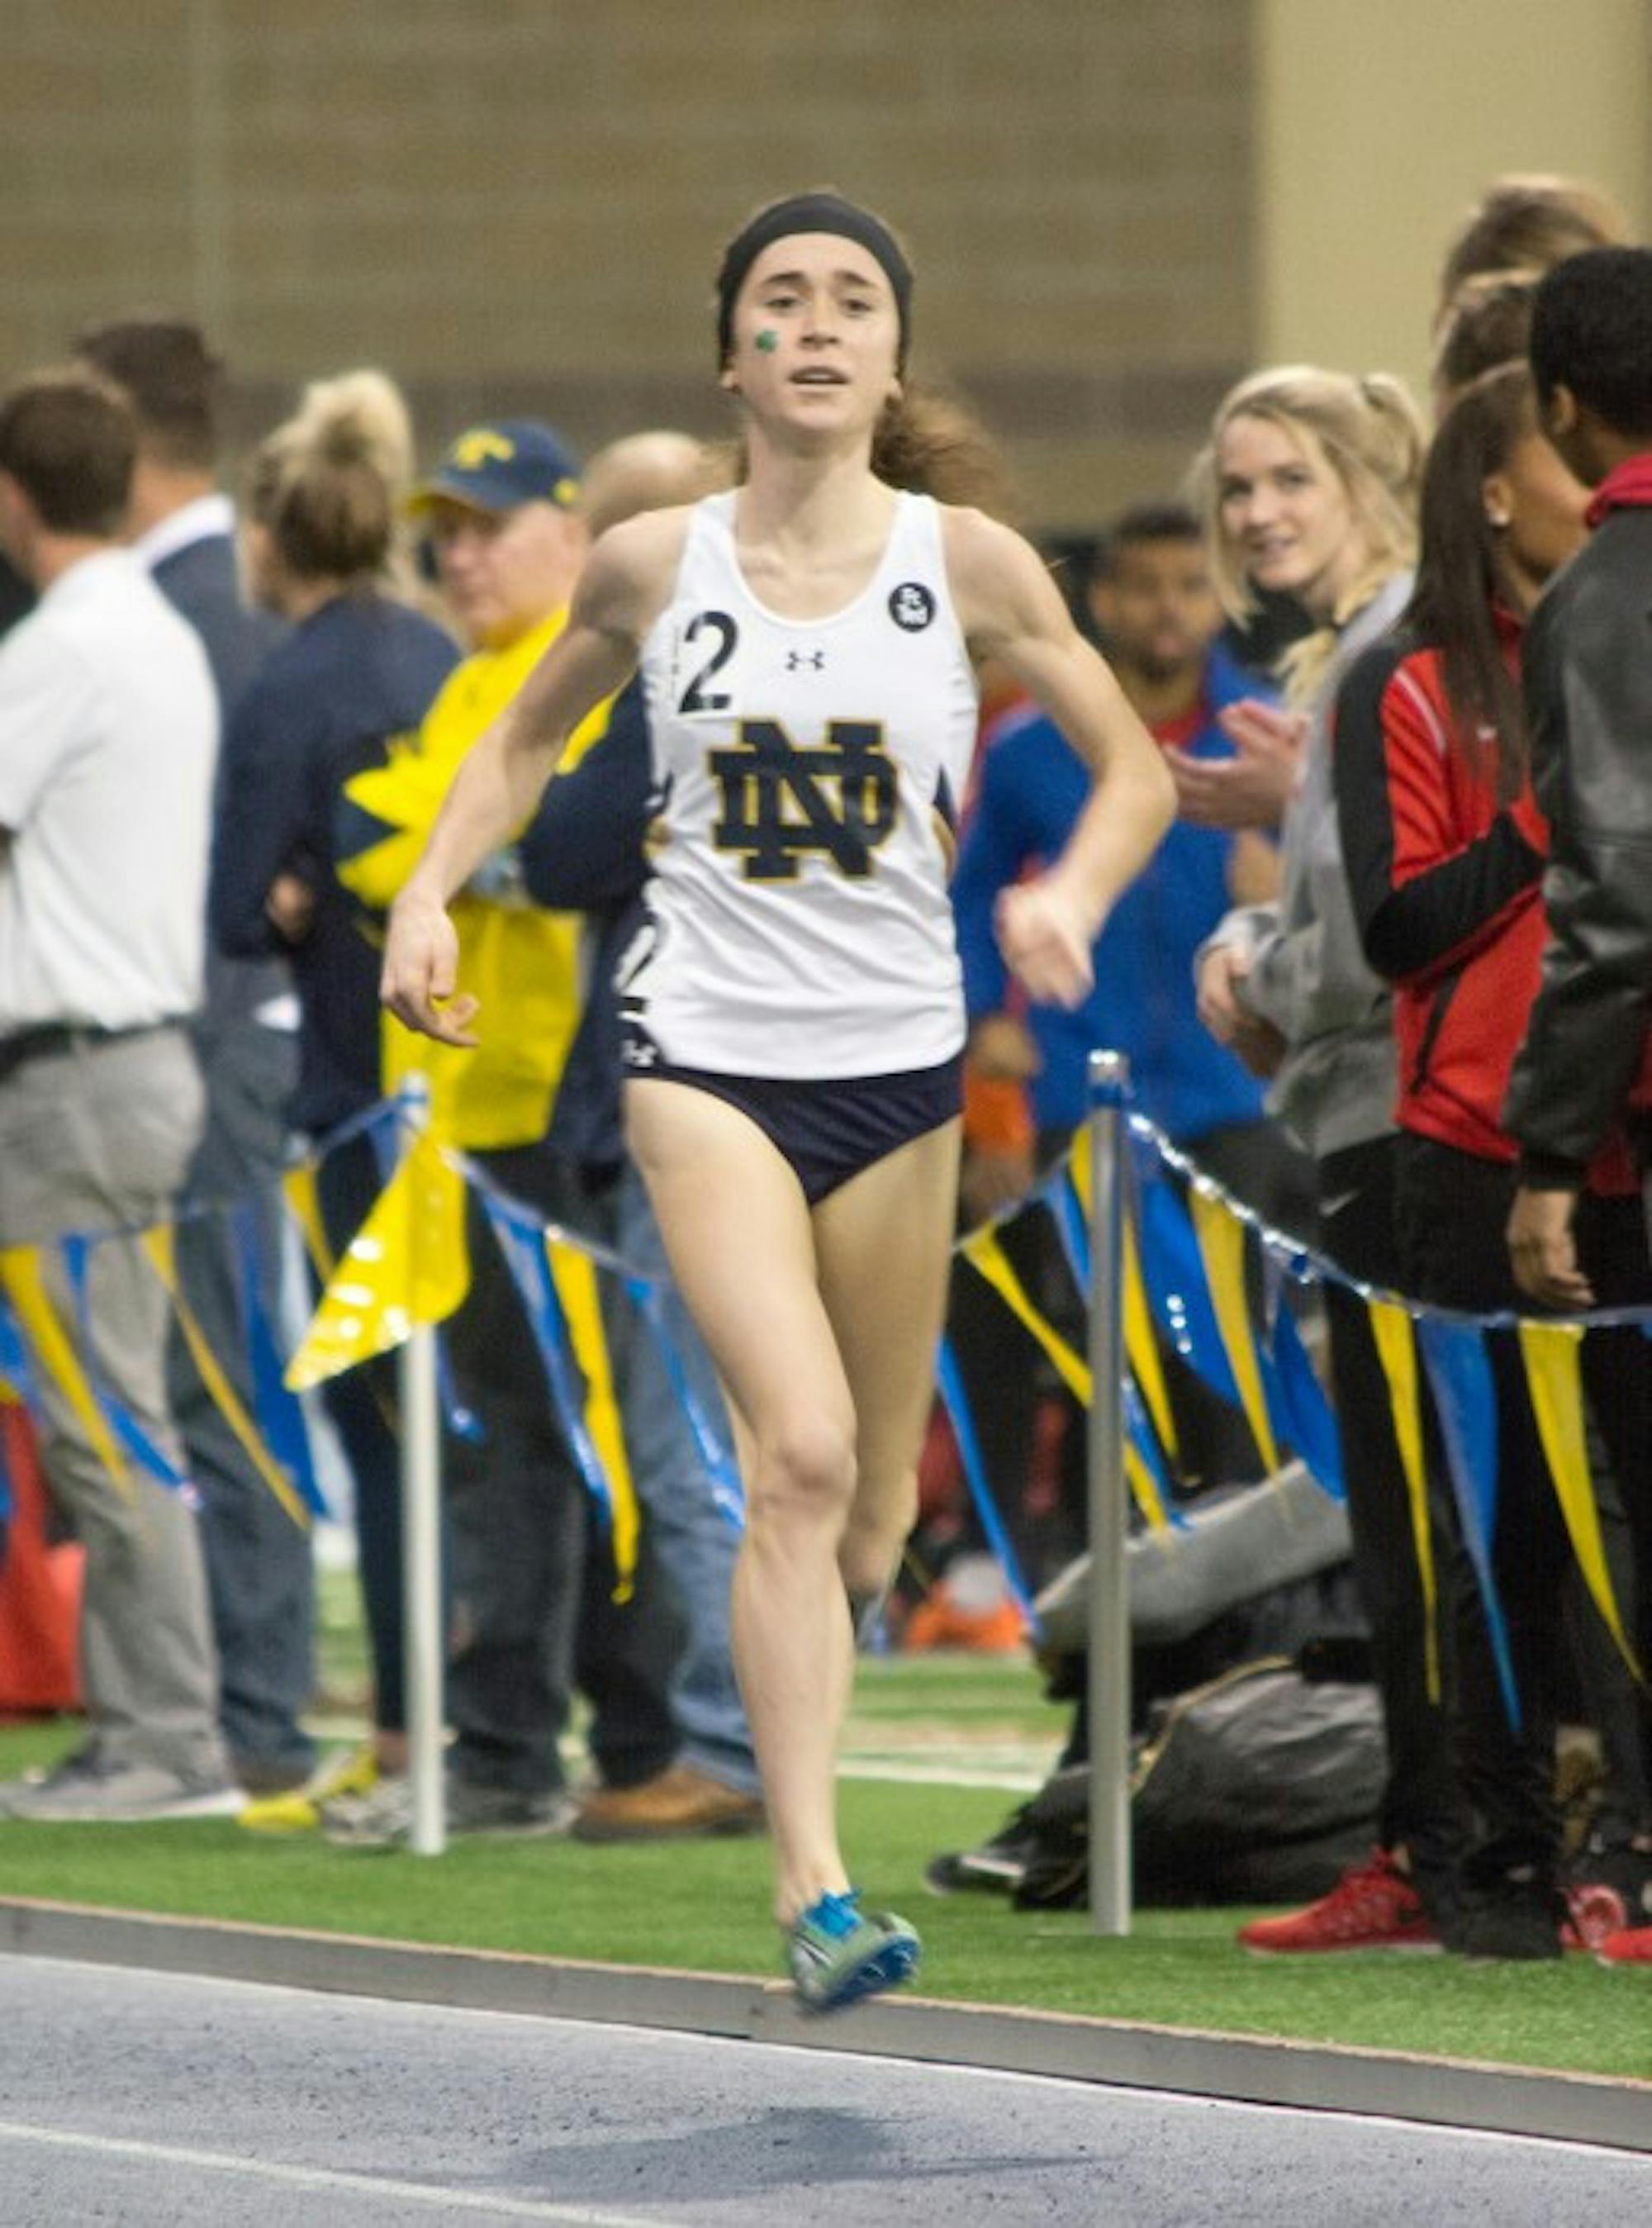 Senior Molly Seidel competes during the Meyo Invitational at Loftus Sports Center on Feb. 6. Seidel set the school’s all-time record with a time of 8:57:13 during her 3000-meter run at the event.